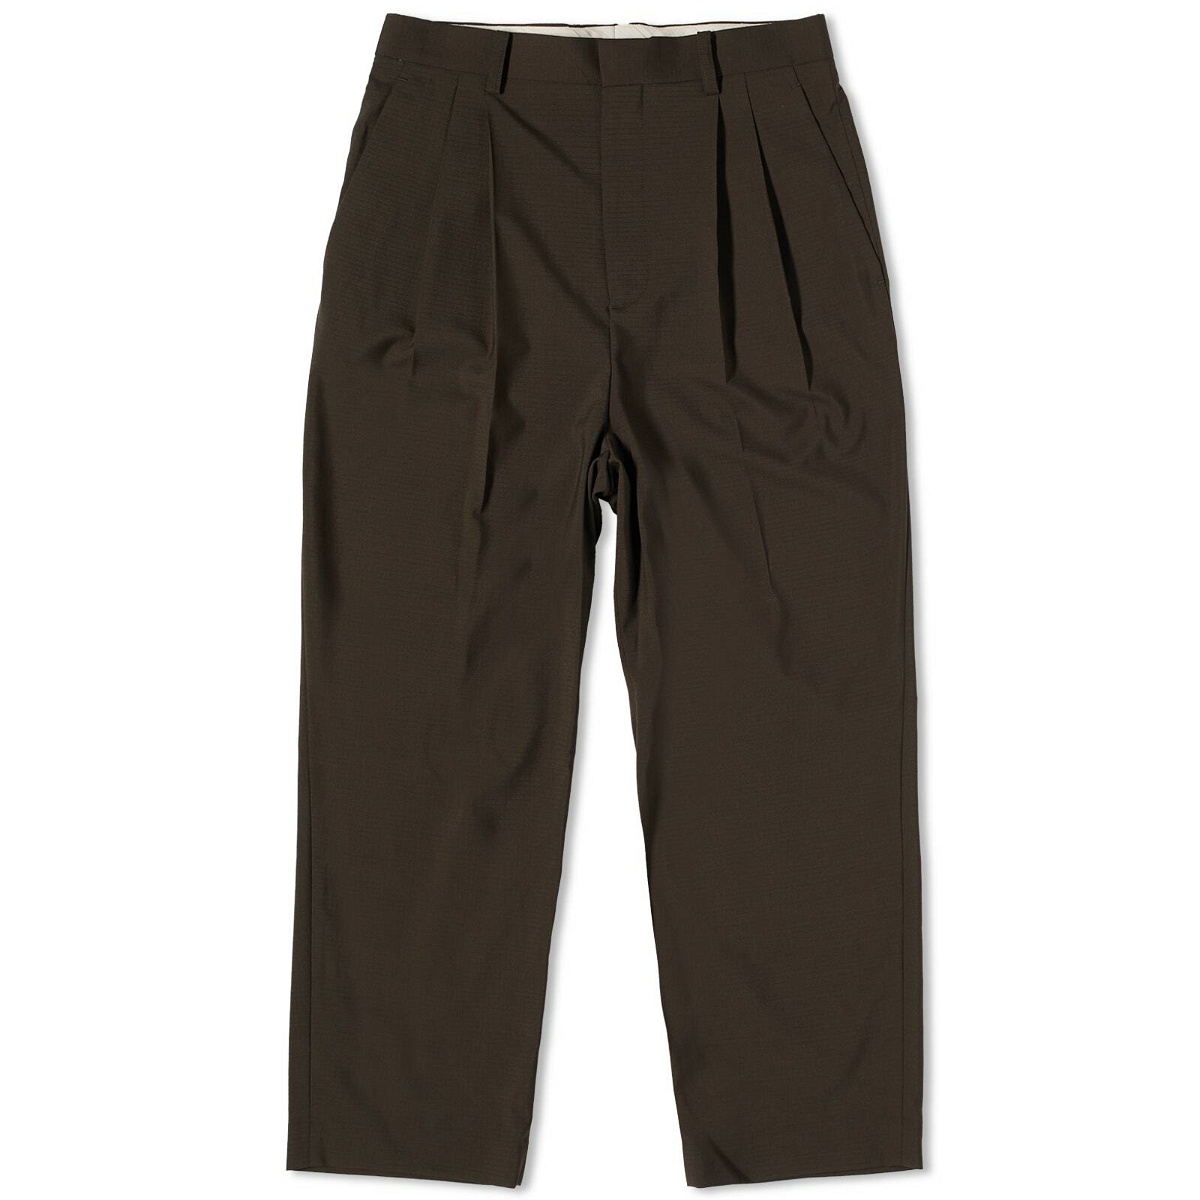 Photo: DIGAWEL Men's 2 Tuck Tapered Pants in Olive